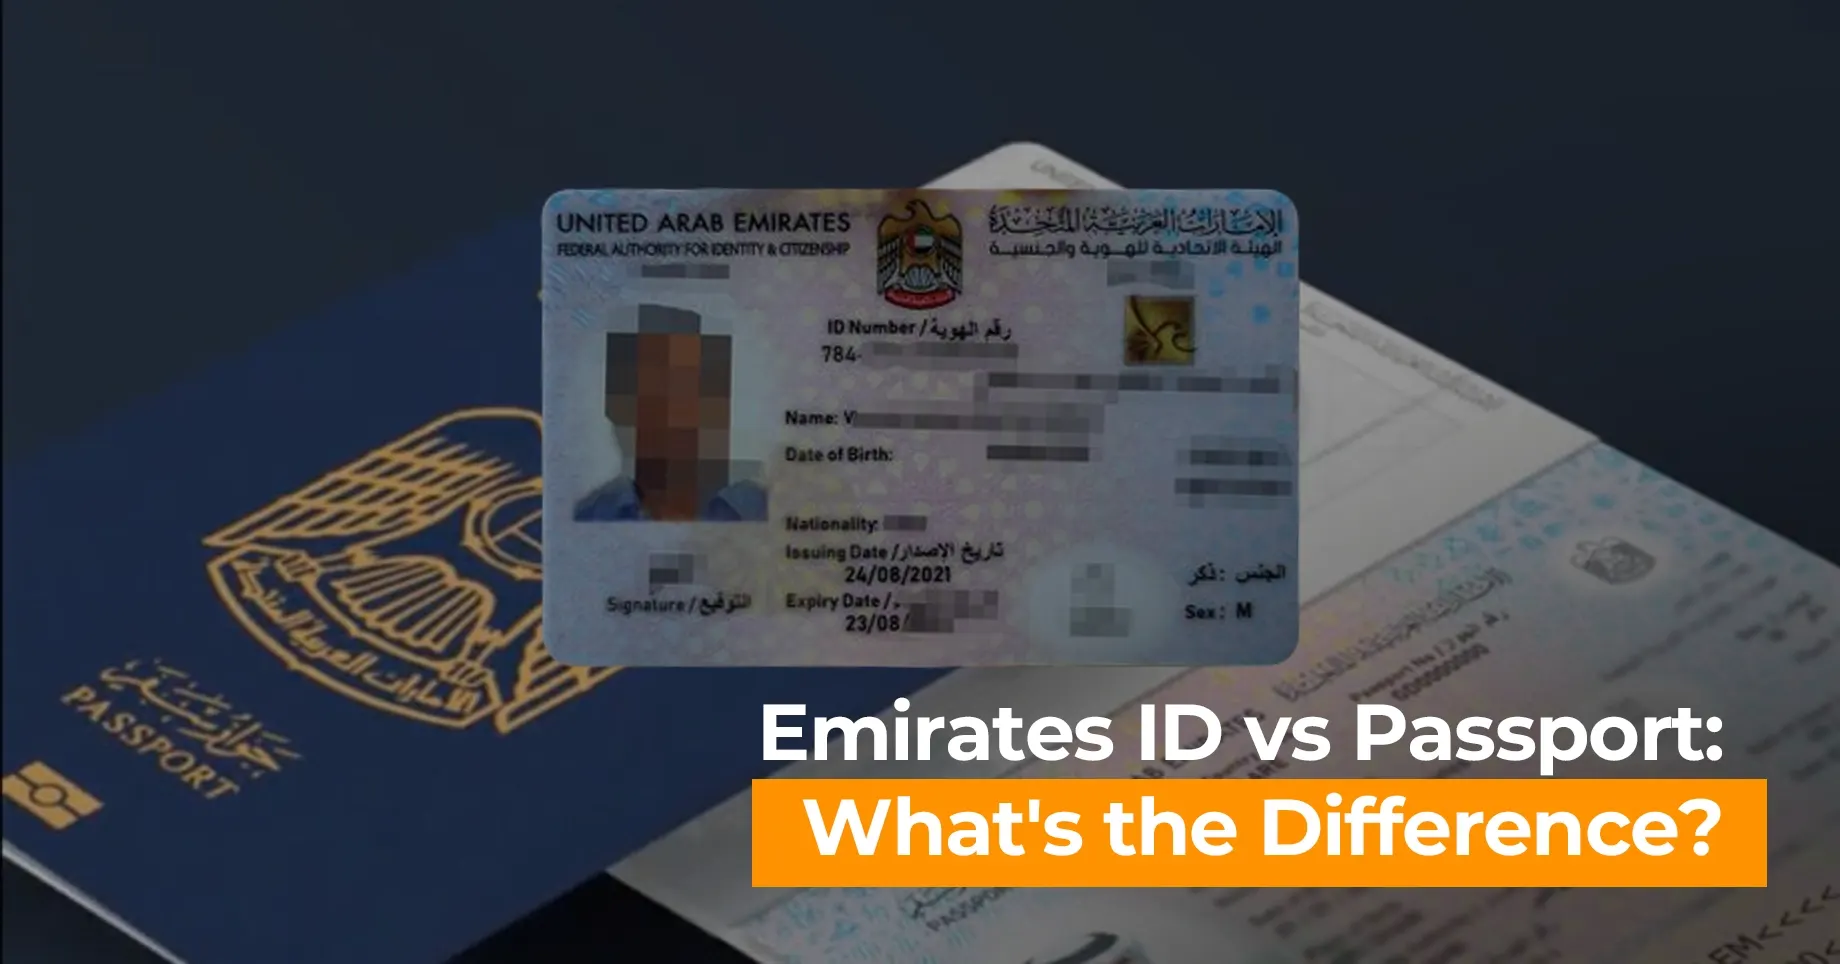 Emirates ID vs Passport: What's the Difference?